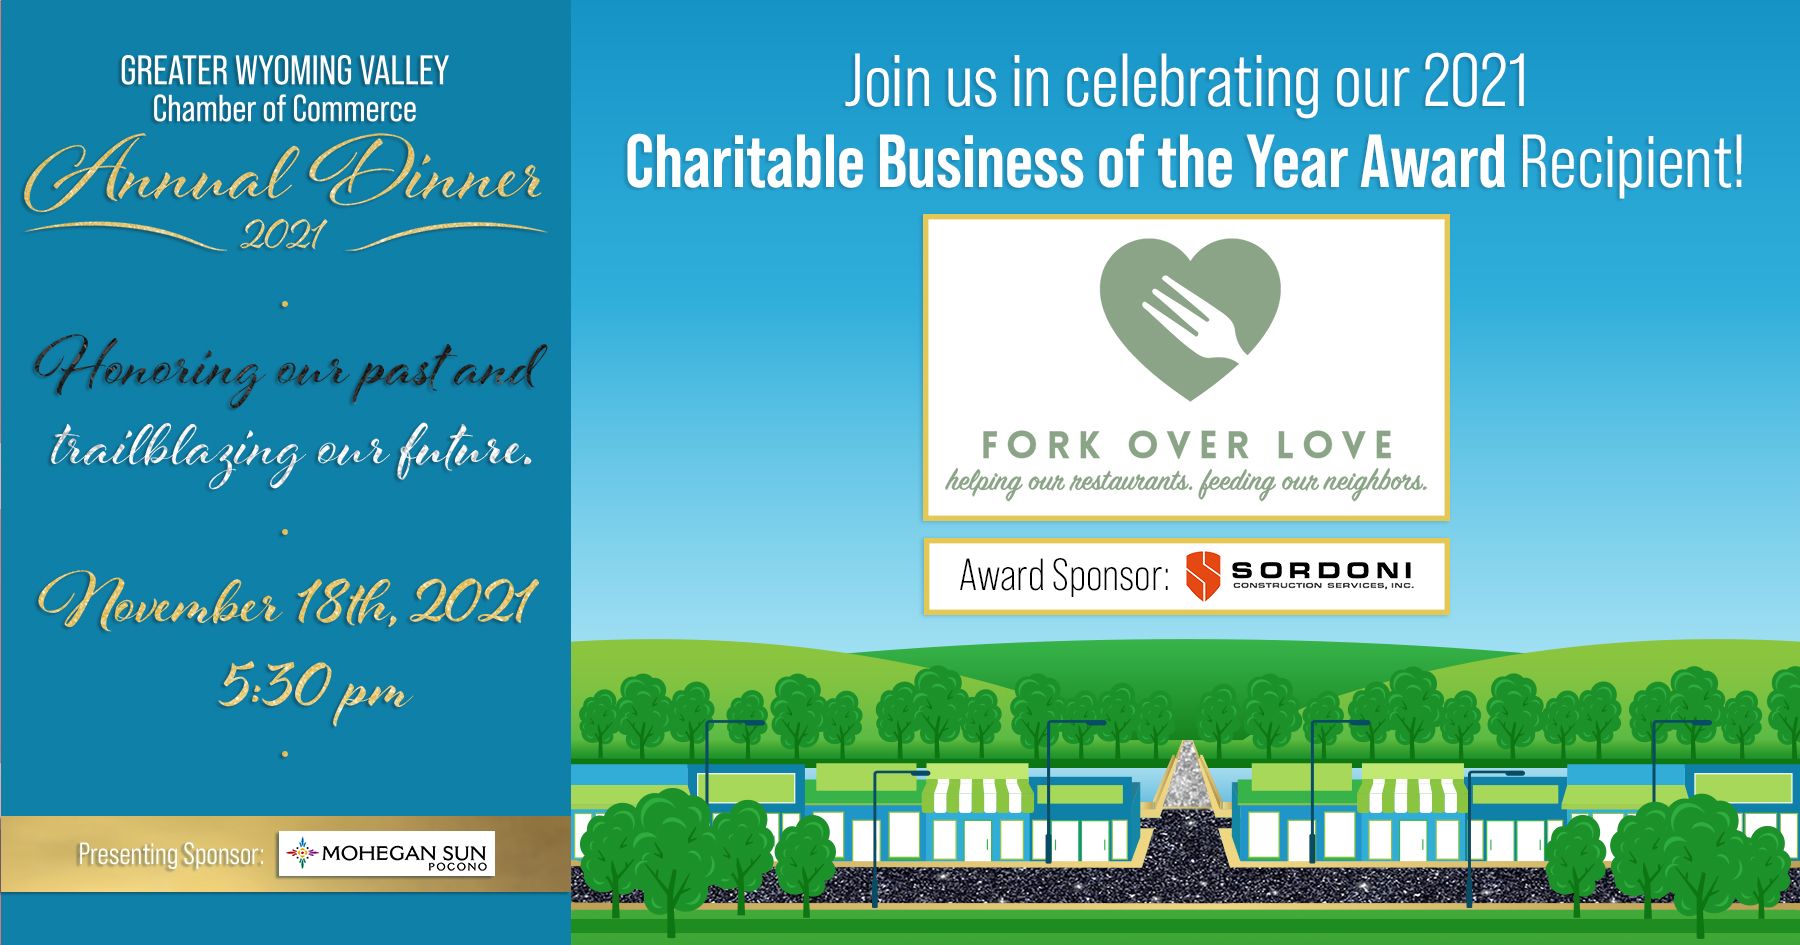 Image for Meet Our 2021 Charitable Organization of the Year Award Recipient: Fork Over Love!